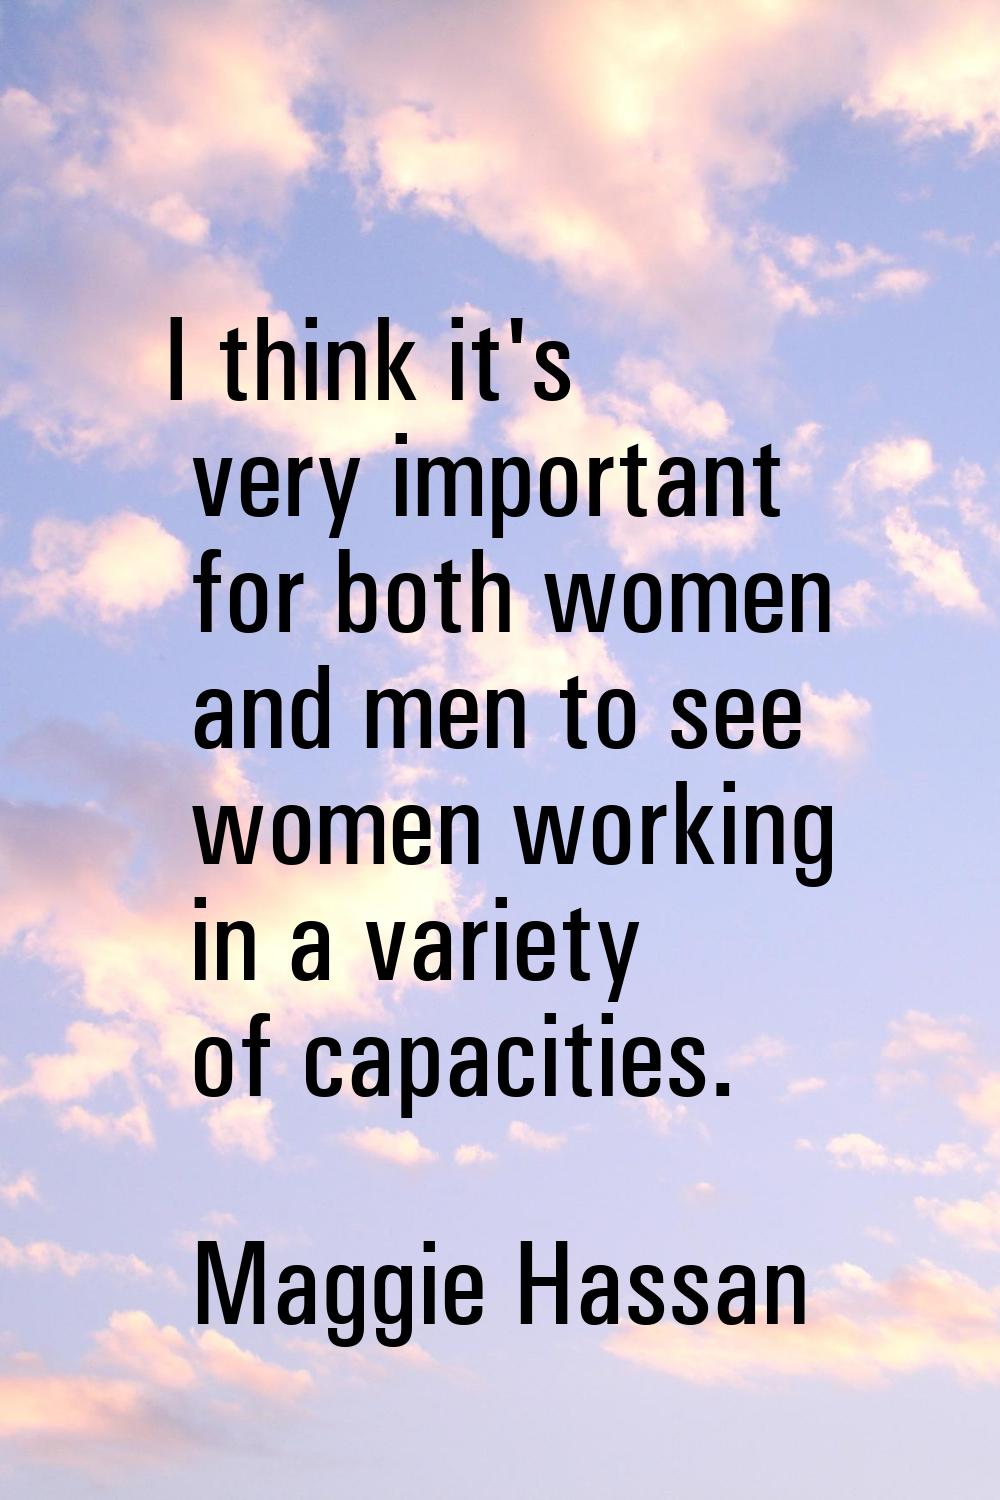 I think it's very important for both women and men to see women working in a variety of capacities.